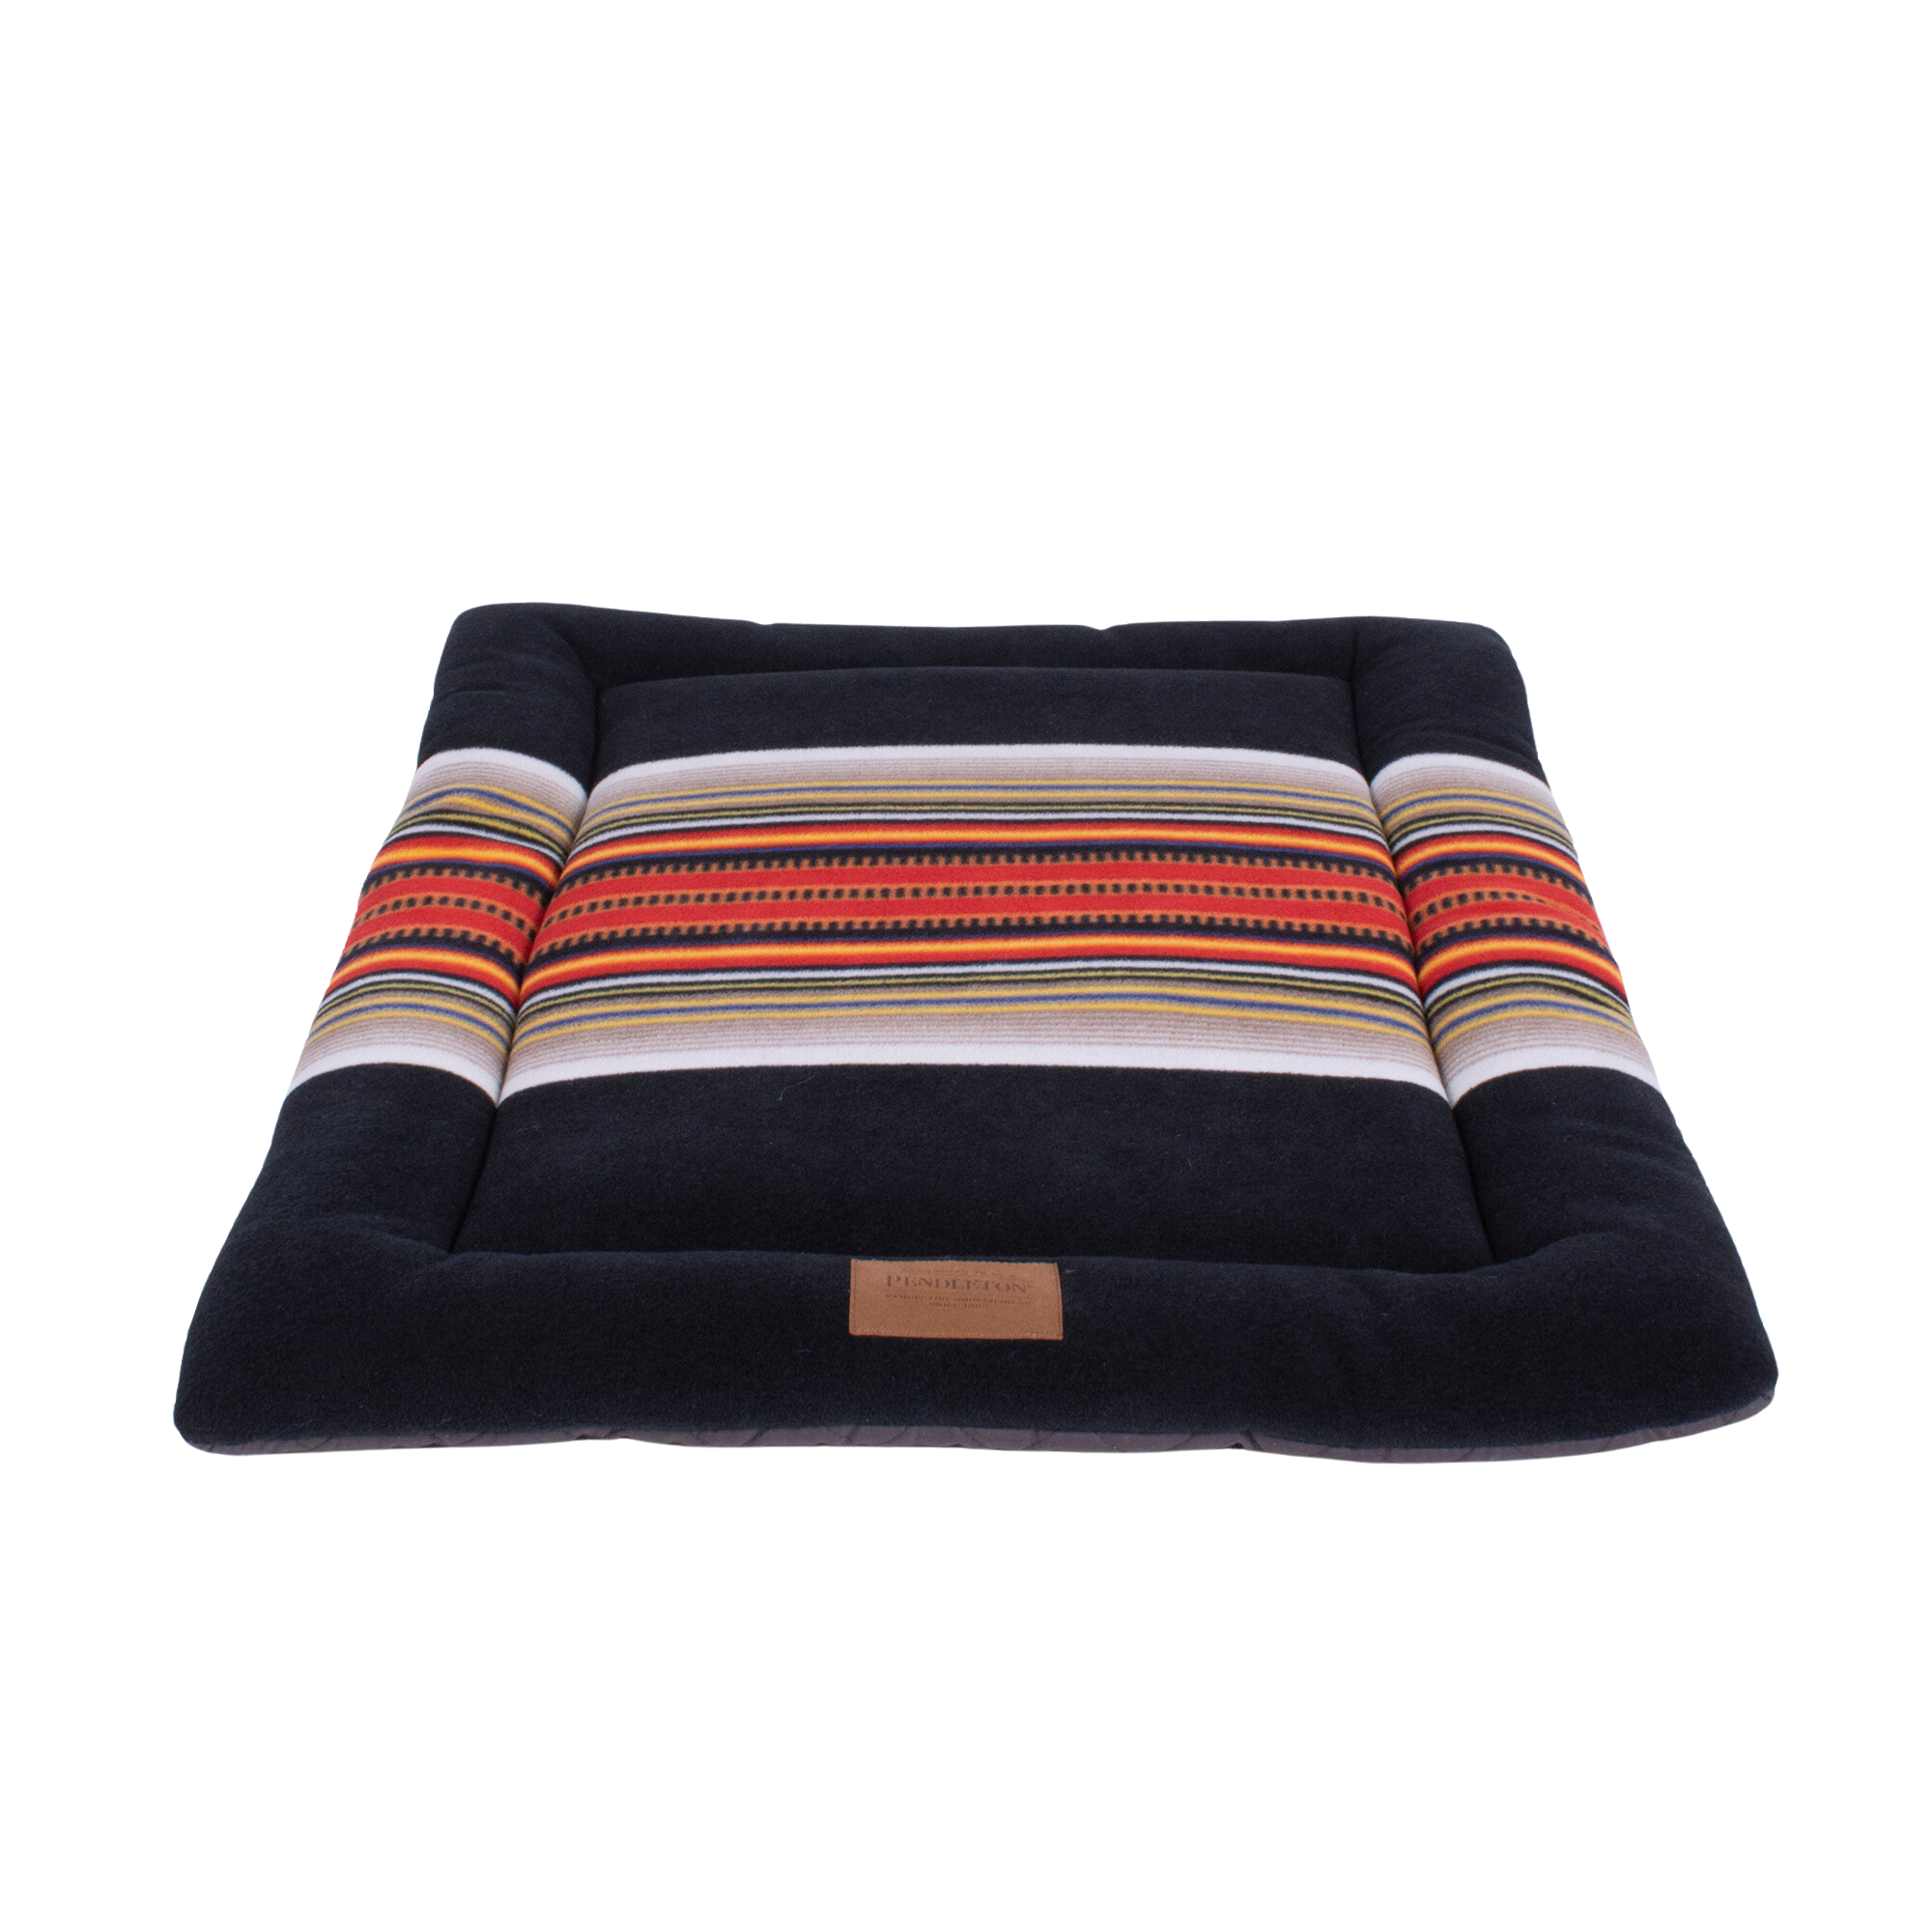 PENDLETON-DOG-BED-ACADIA-NATIONAL-PARK-KENNEL-CRATE-MAT-BLACK-WHITE-RED-YELLOW